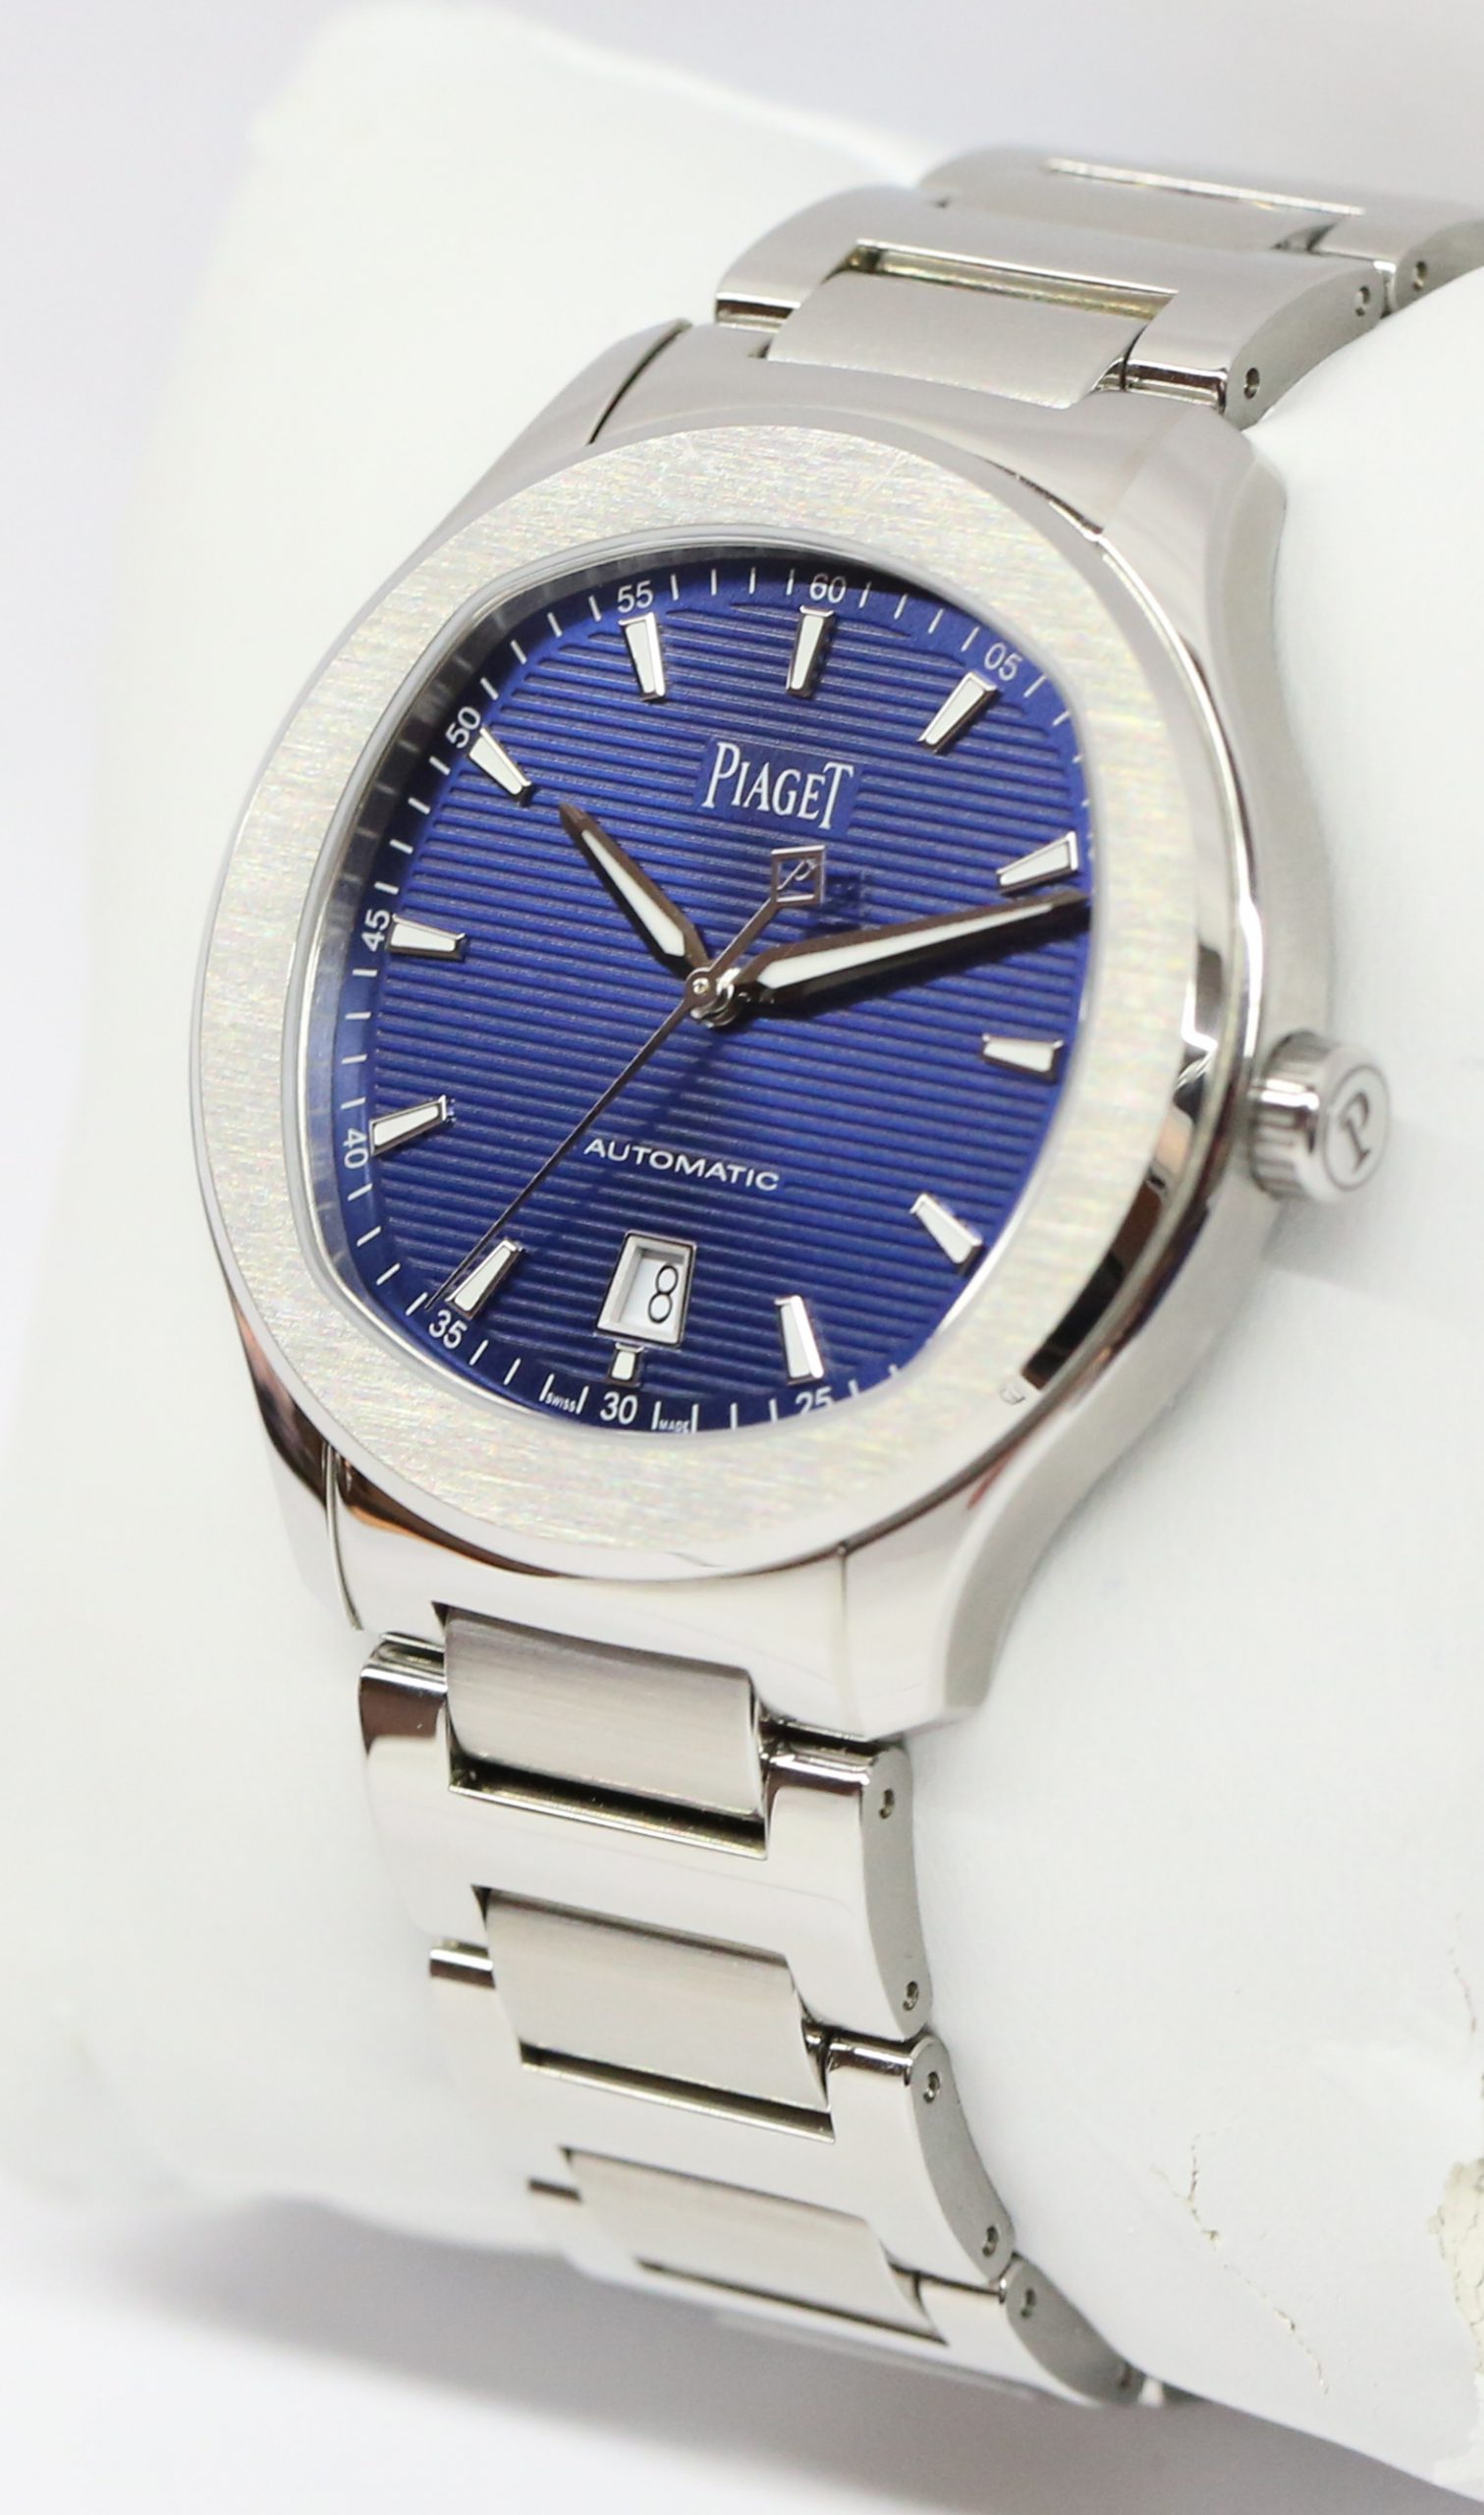 Piaget Polo S in Stainless Steel, Automatic watch, 42mm, with Blue ...